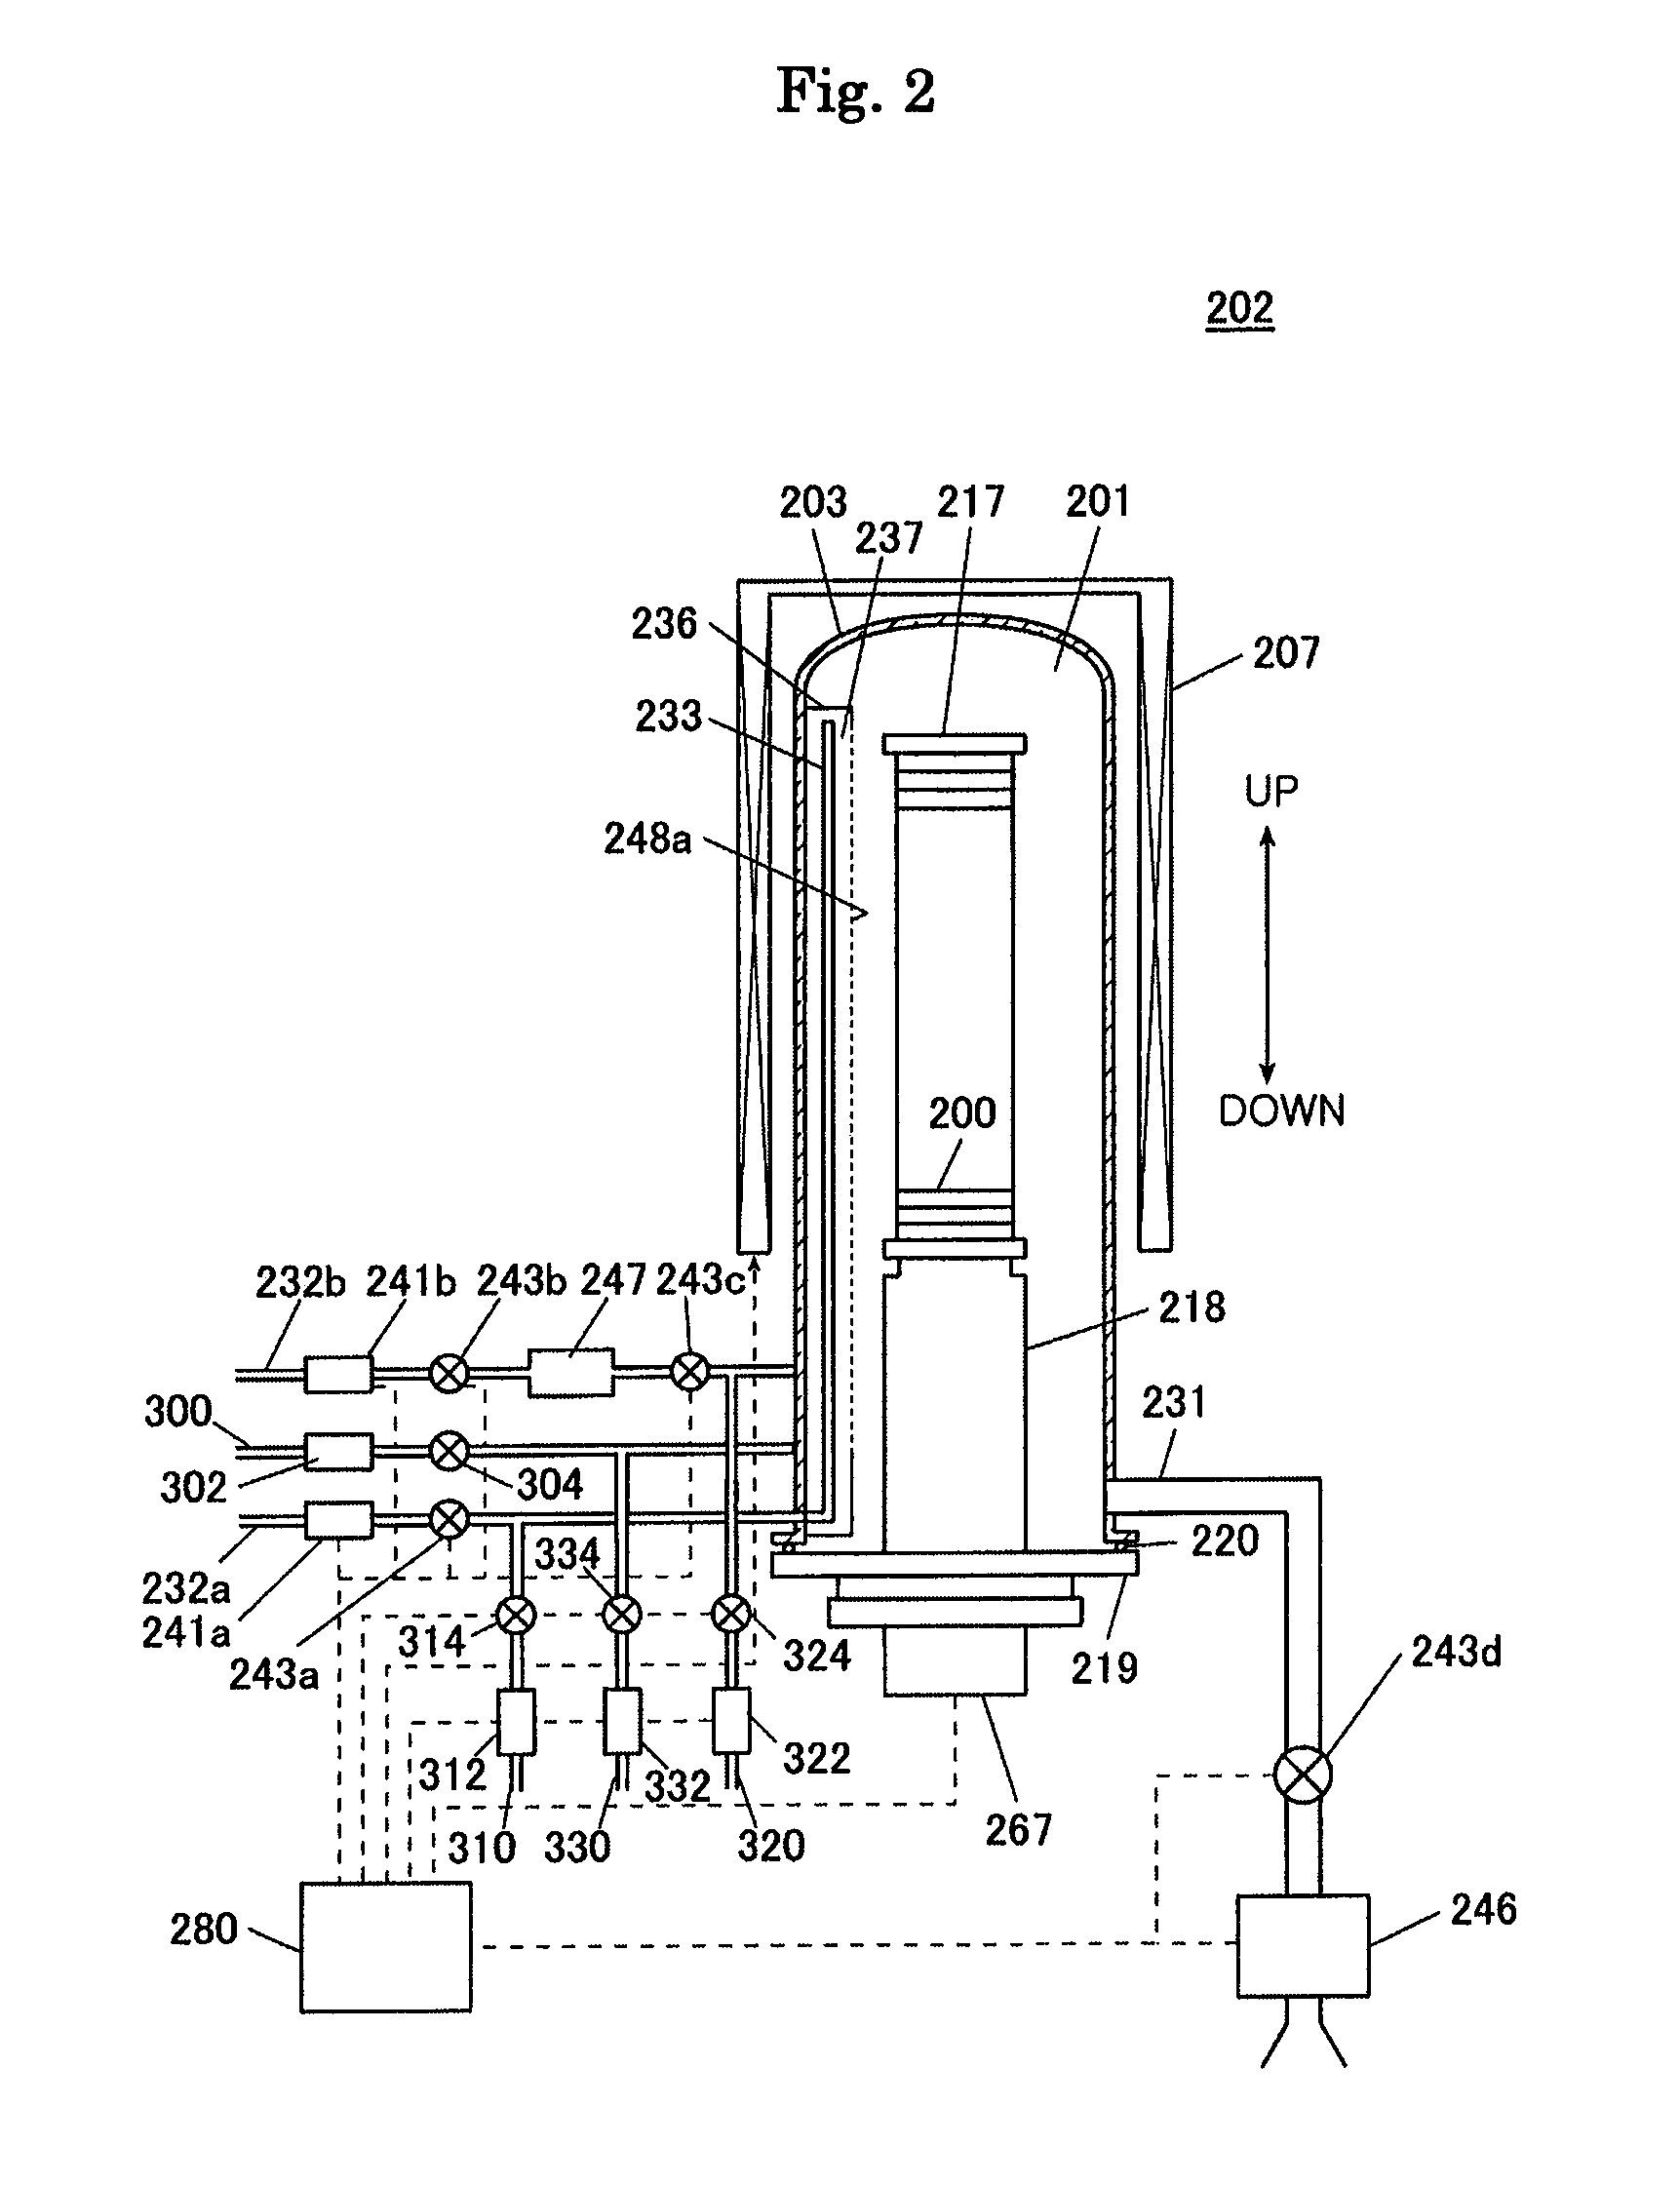 Substrate processing apparatus and coating method